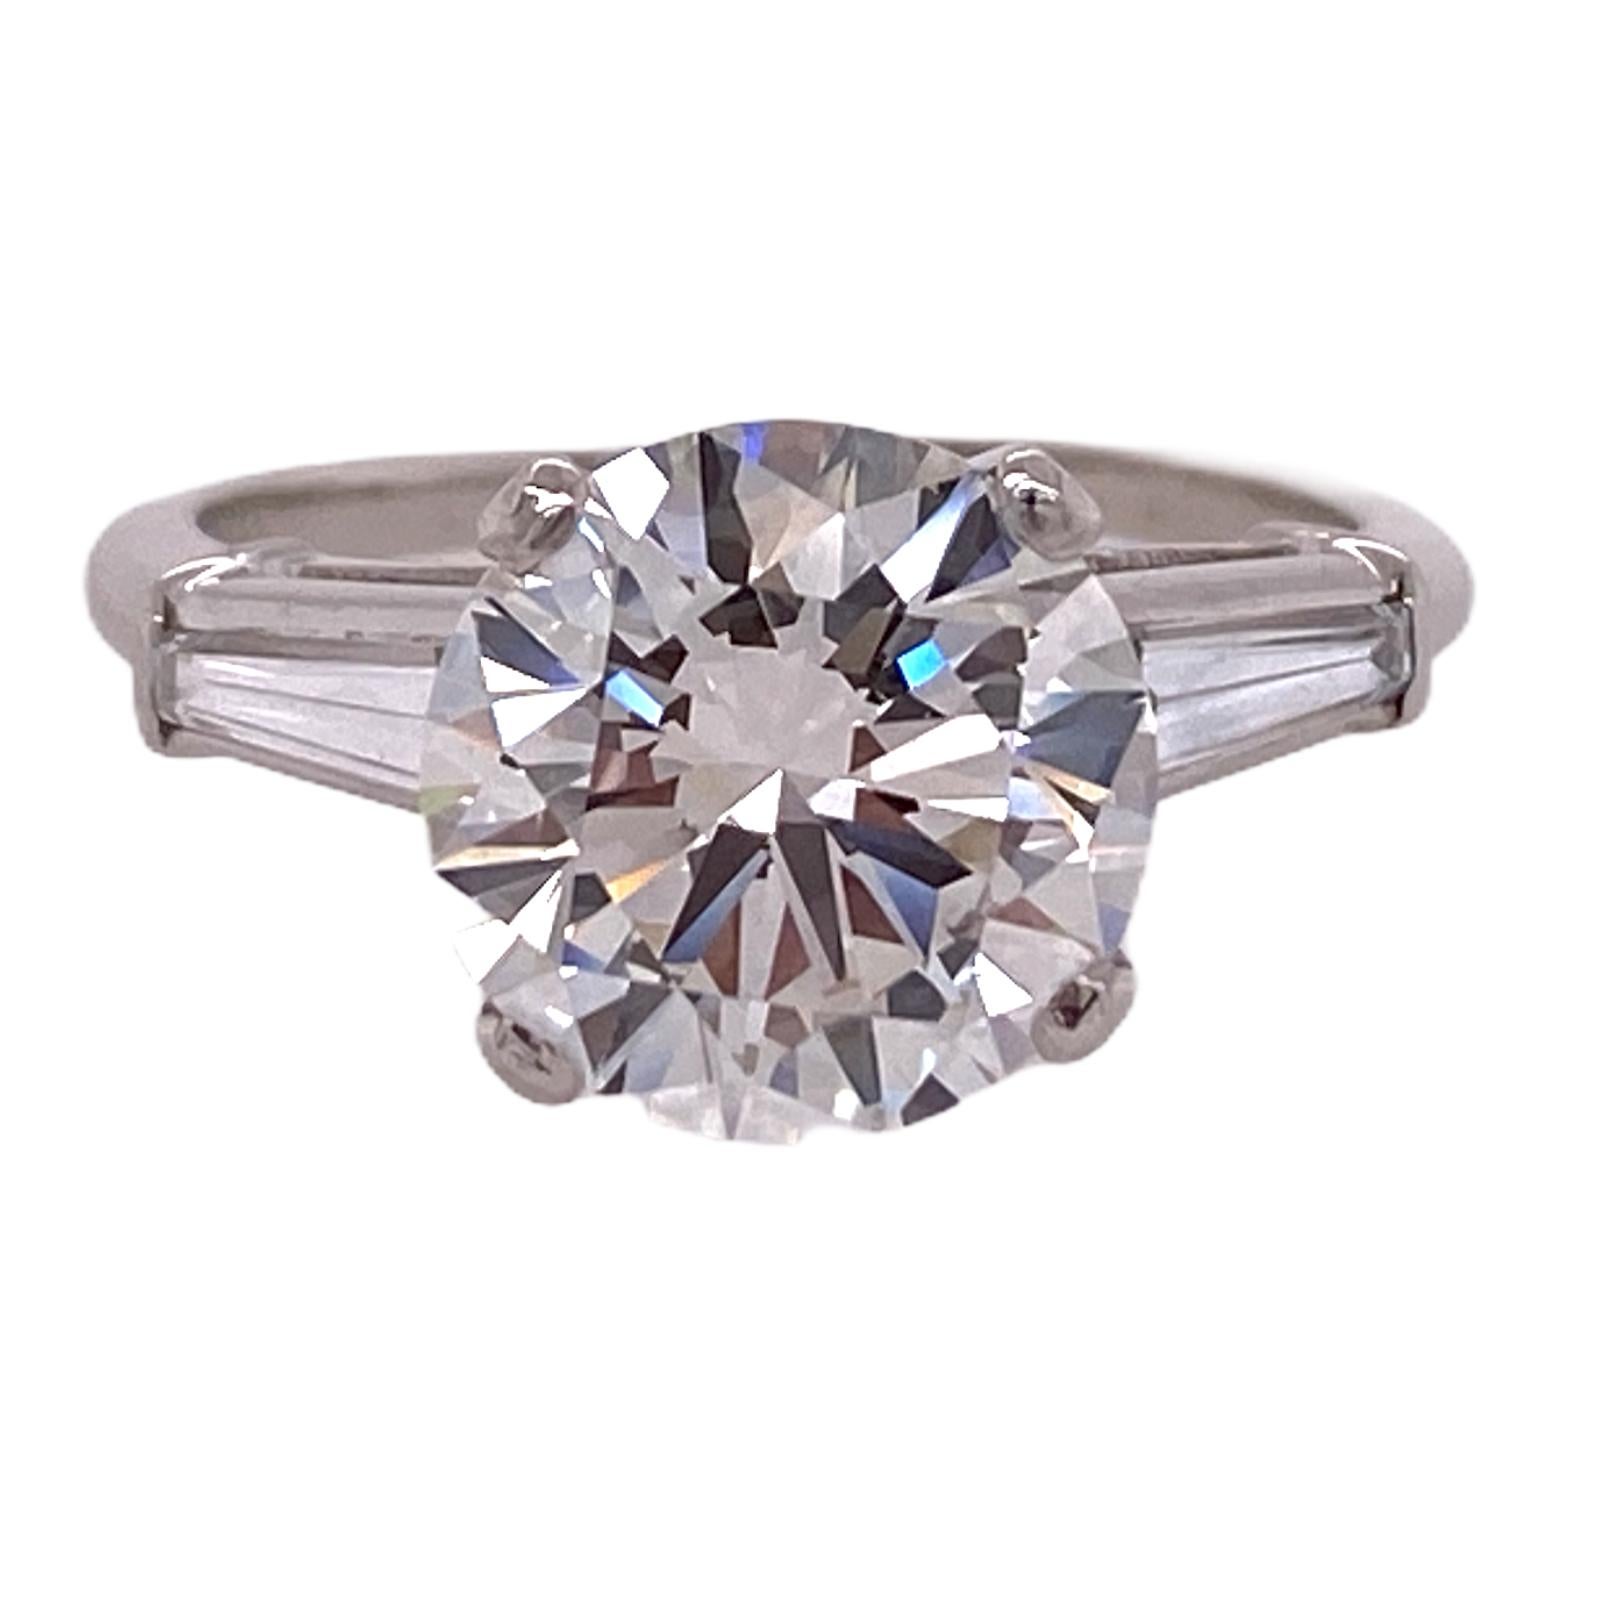 Stunning diamond engagement ring hand crafted in platinum. The round brilliant cut diamomd weighs 3.39 carats and is graded by the GIA J color and VS1 clarity. The sparkling center diamond is flanked by two tapered baguettes weighing .30 ctw. The